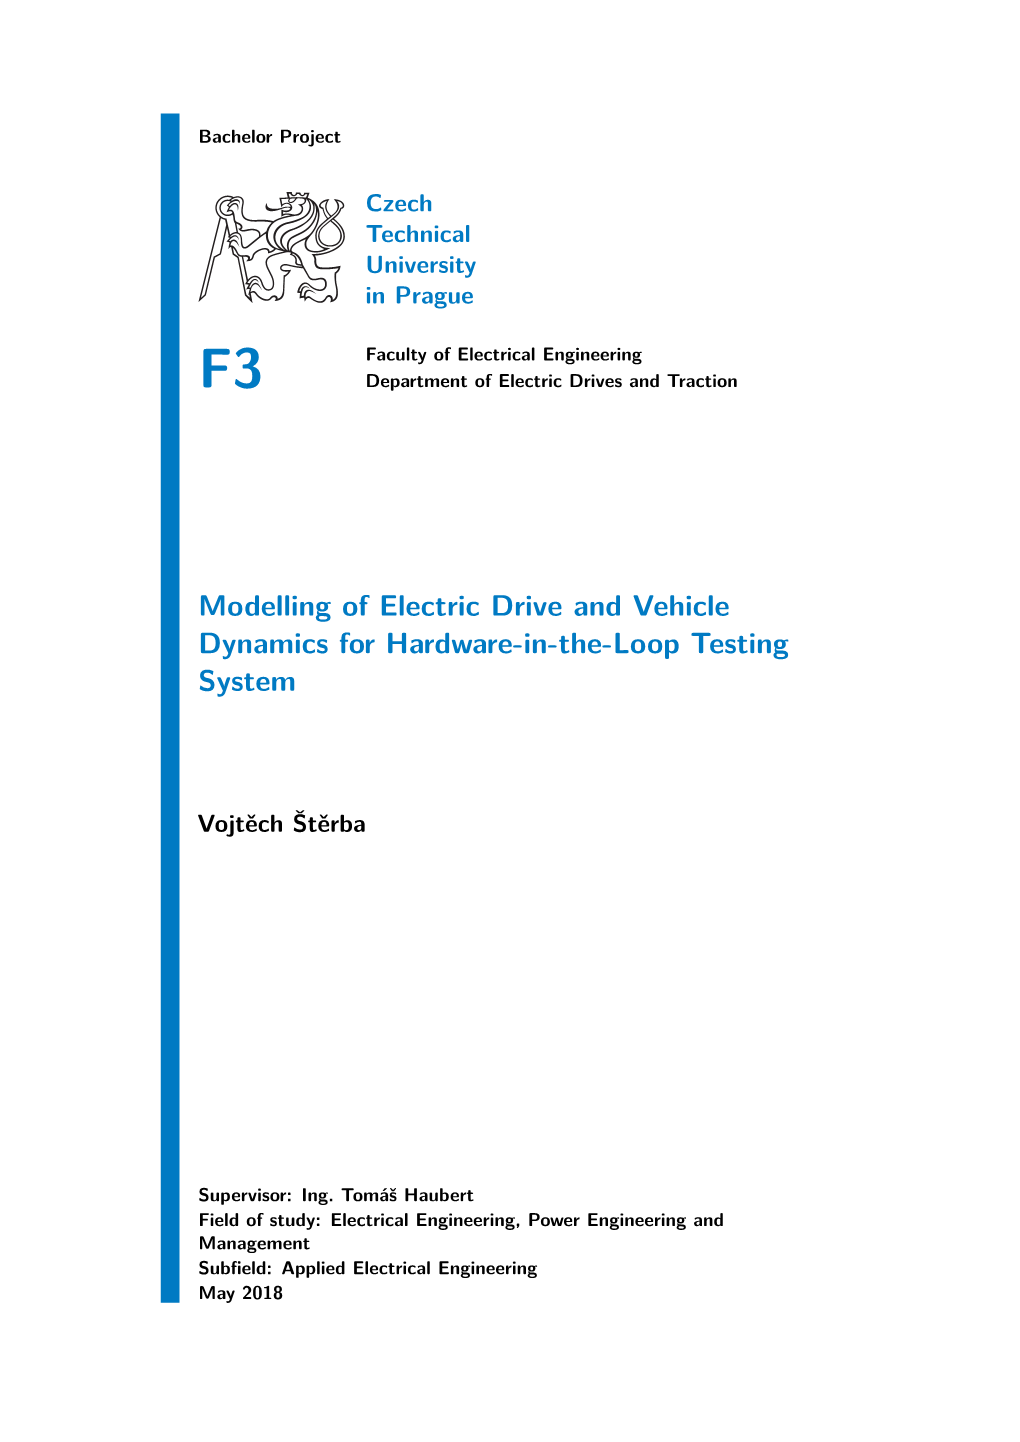 Modelling of Electric Drive and Vehicle Dynamics for Hardware-In-The-Loop Testing System